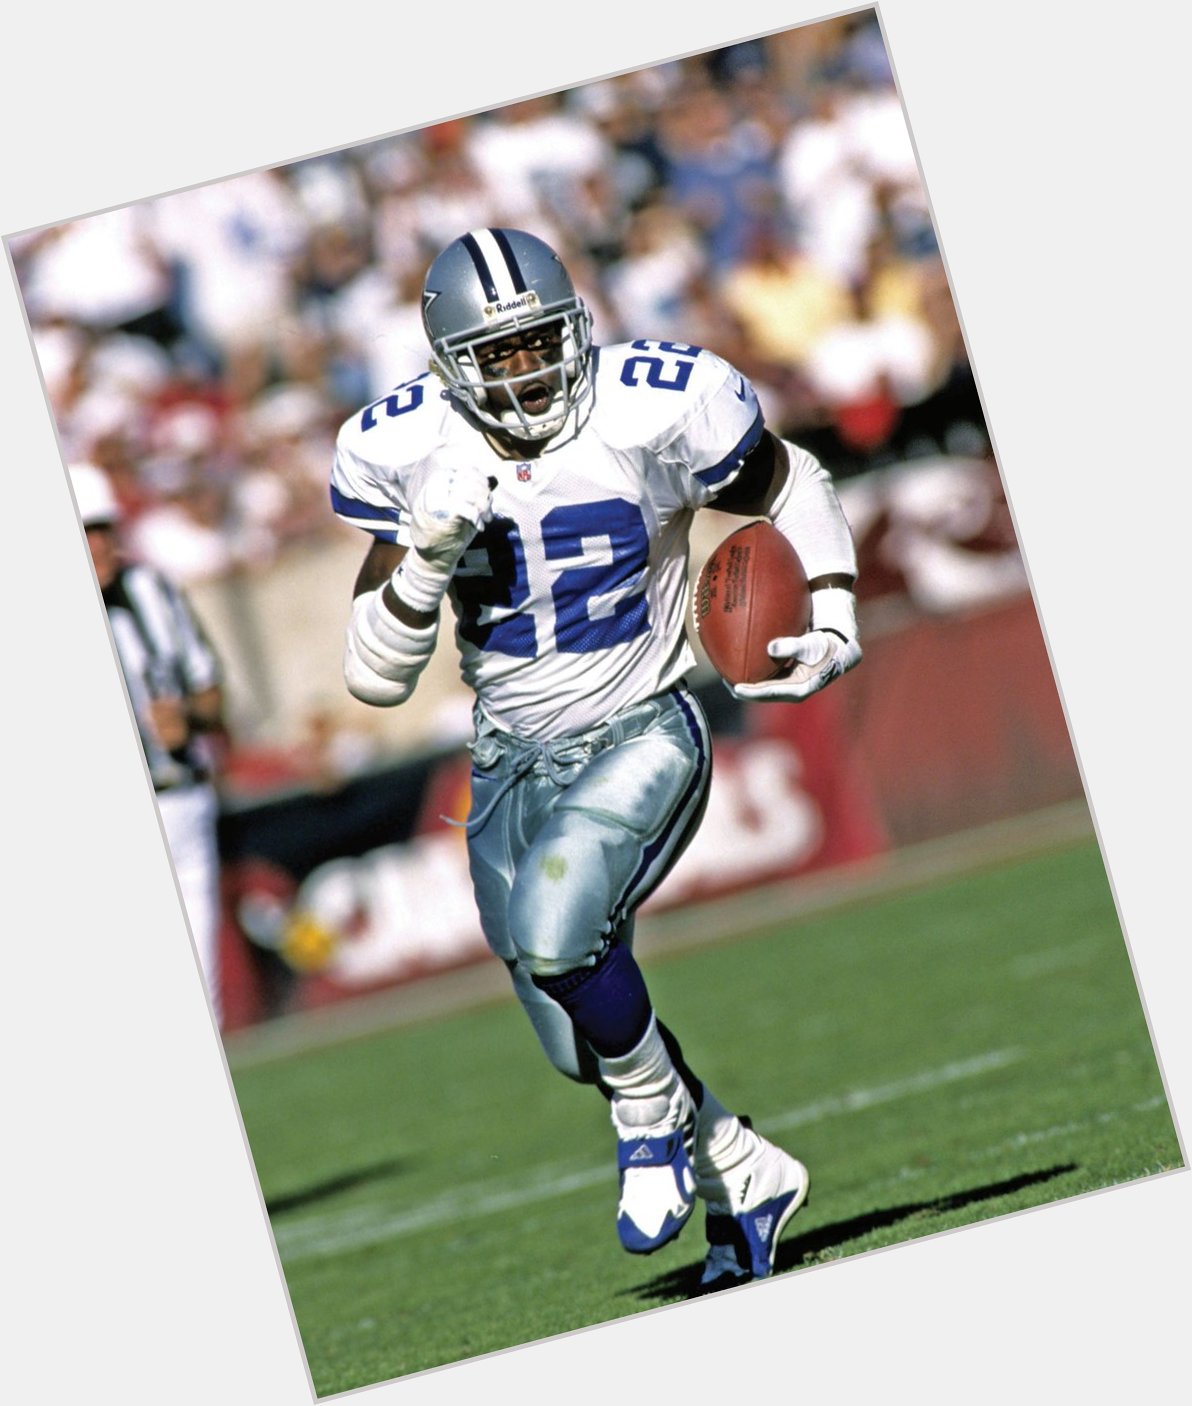 Happy birthday to former Cowboys great running back Emmitt Smith, who turns 49 today! 